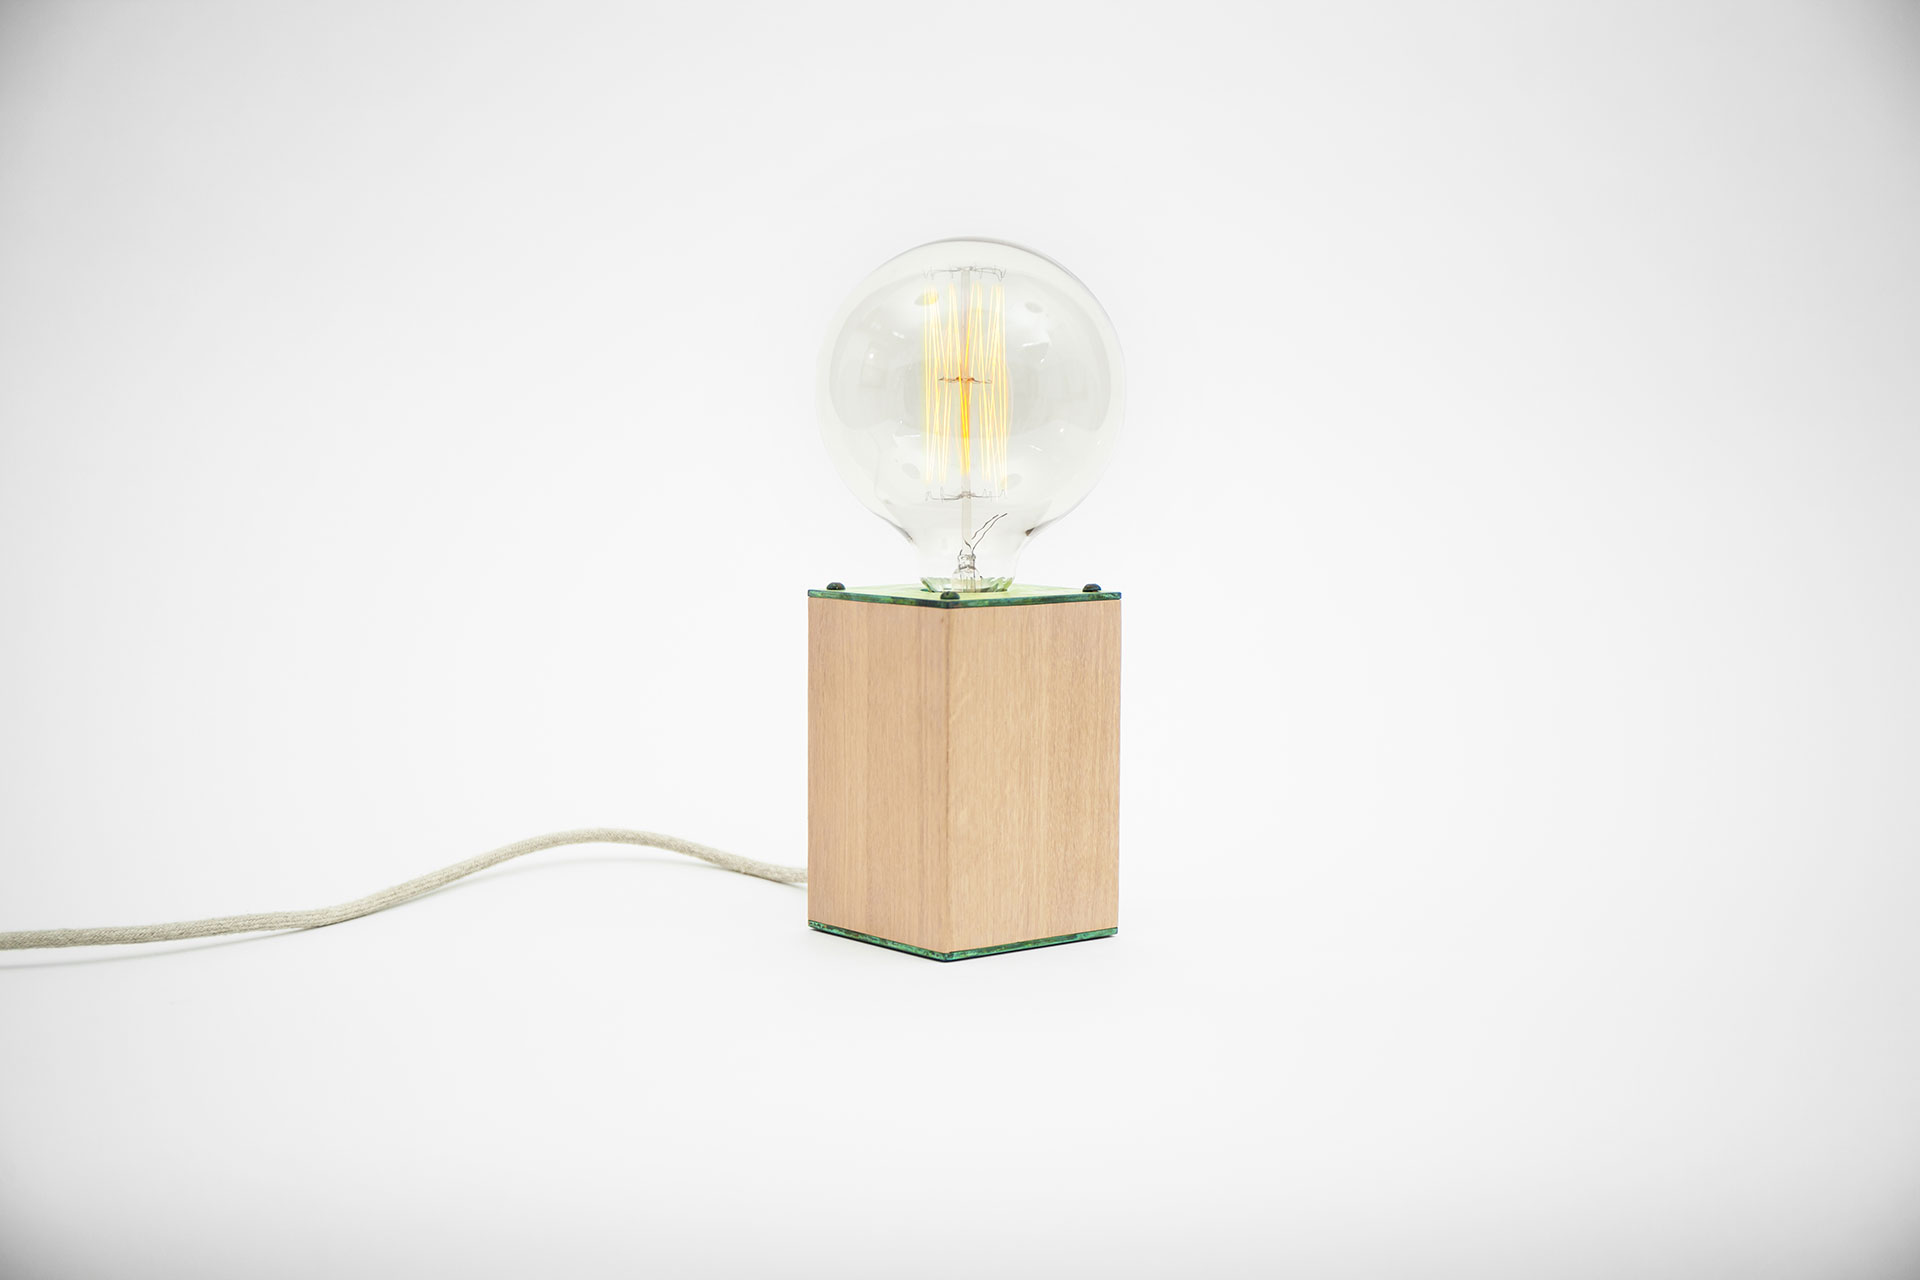 Scandinavian design bedside lamp in natural oak wood and fashionable green patina with touch dimmer and retro bulb